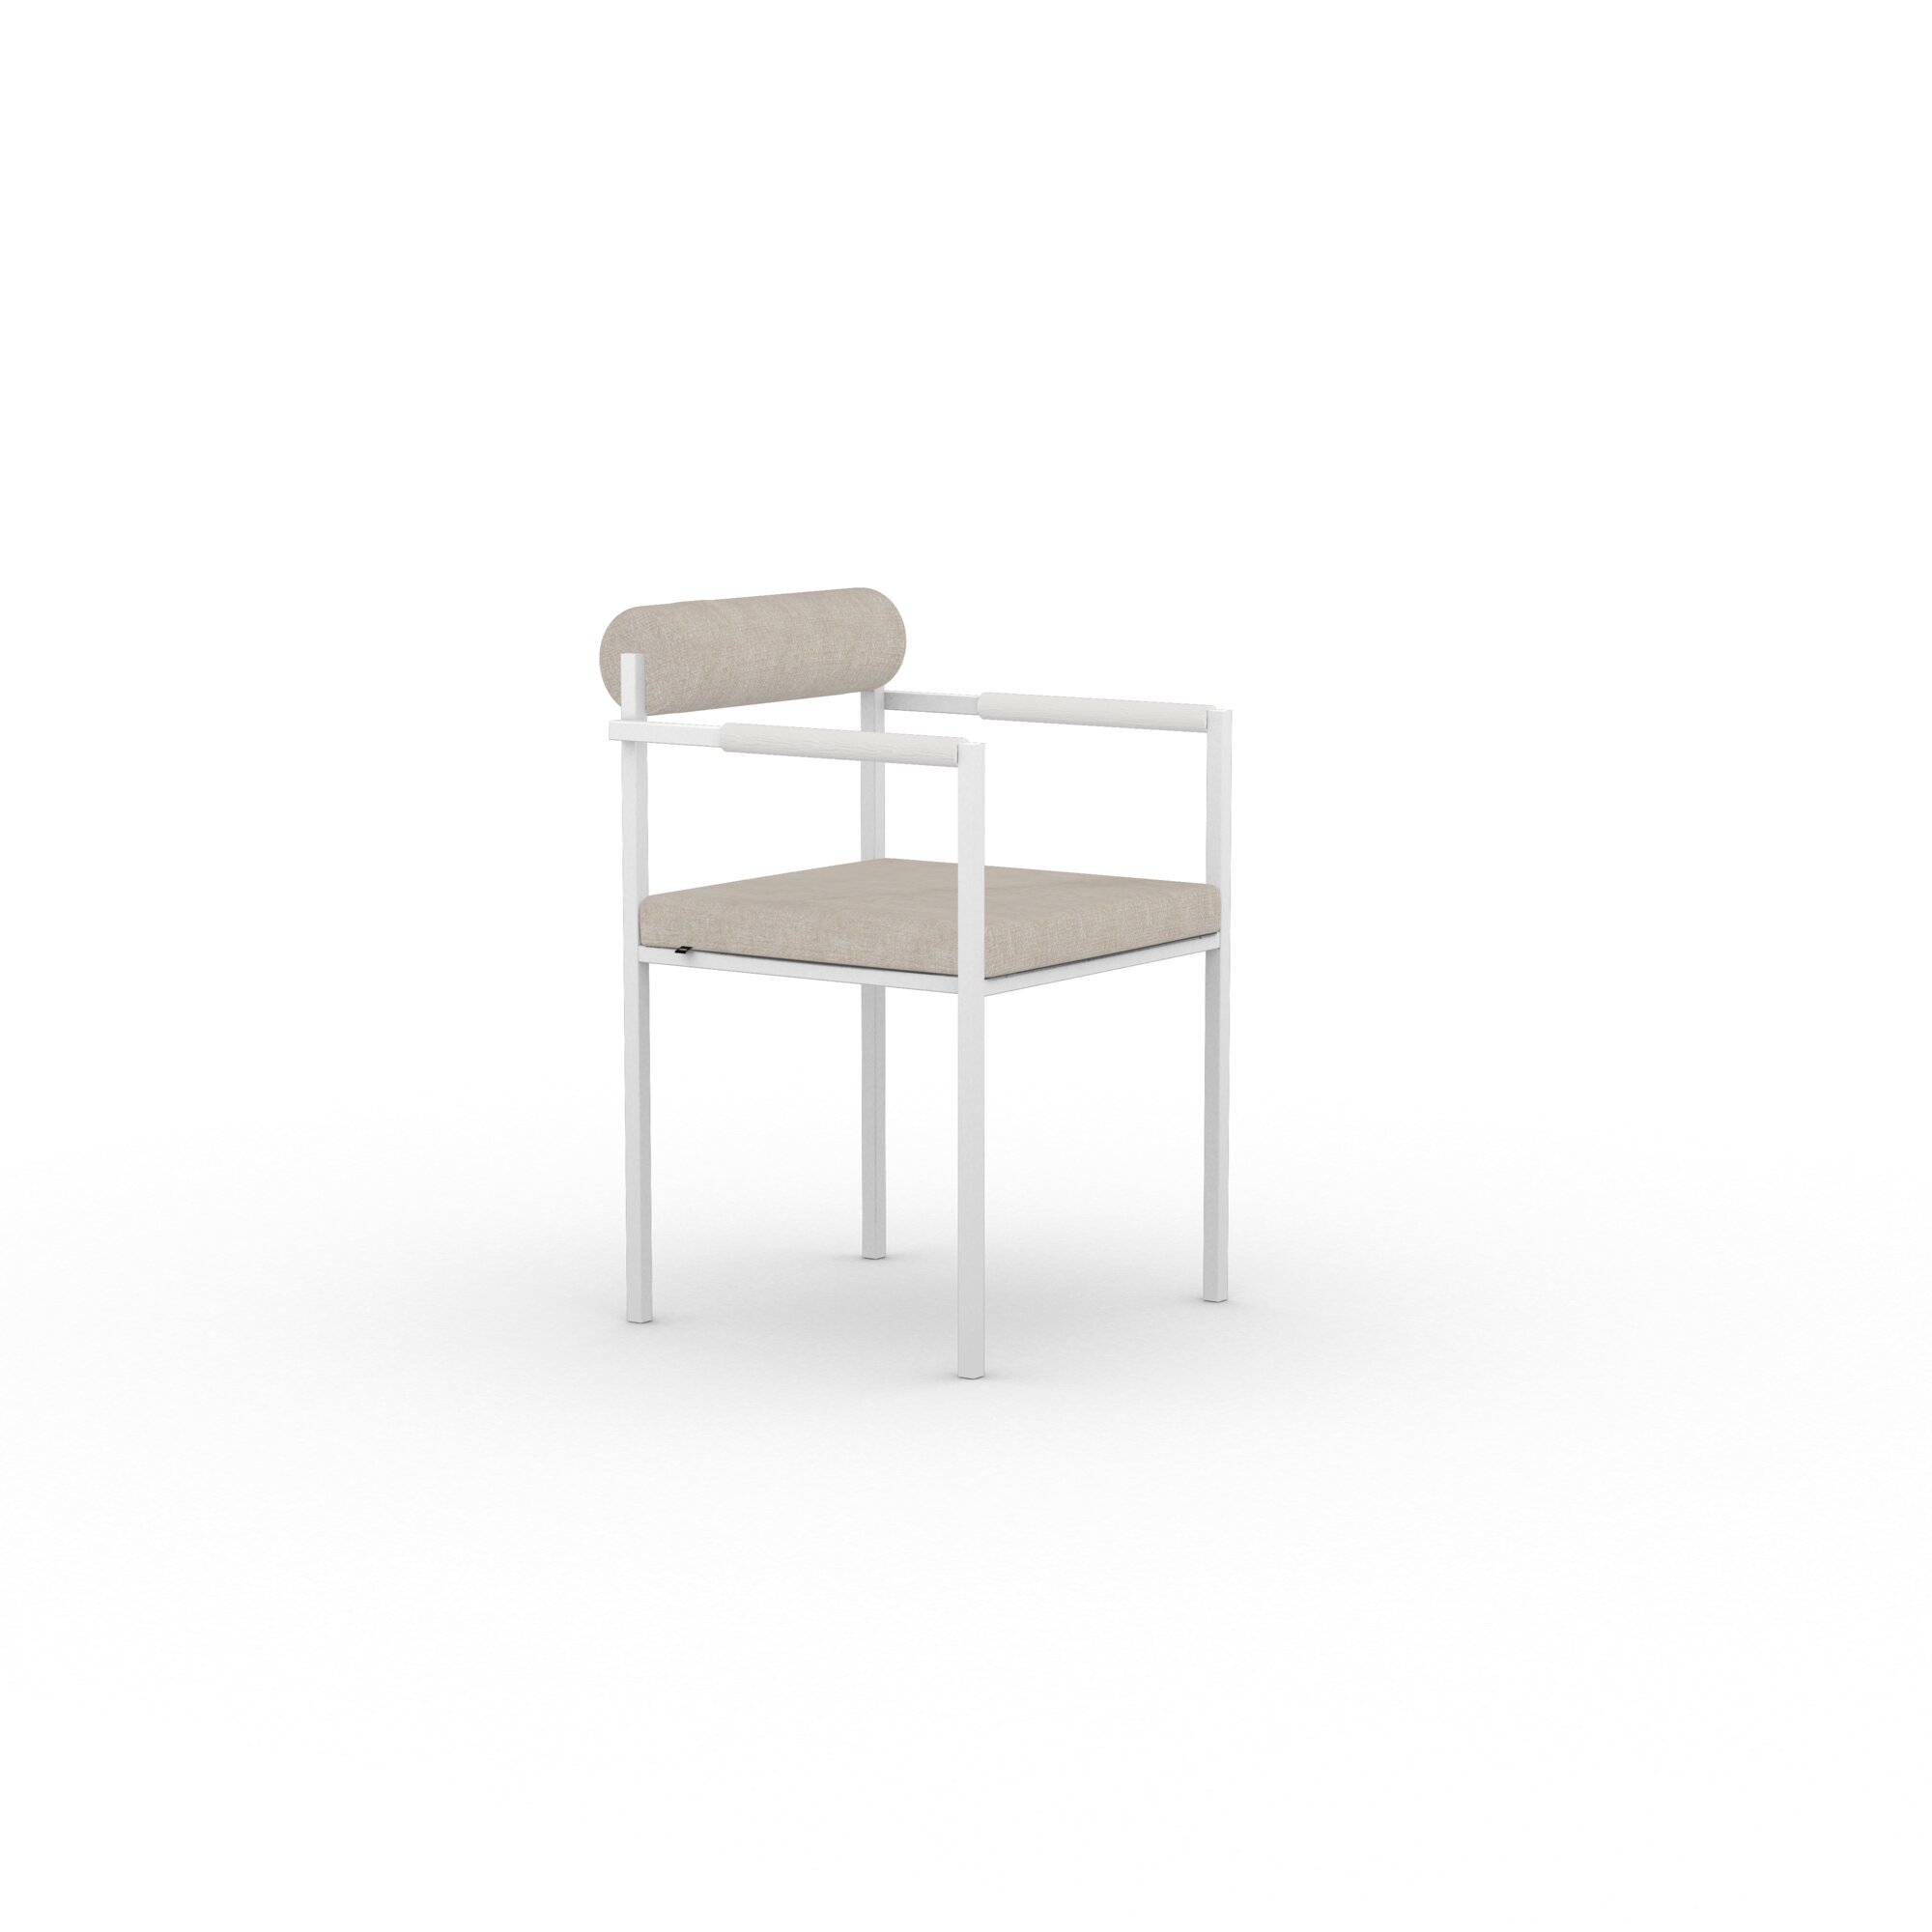 Design modern dining chair | Bolster Dining Chair with armrest Beige orion shitake124 | Studio HENK| 